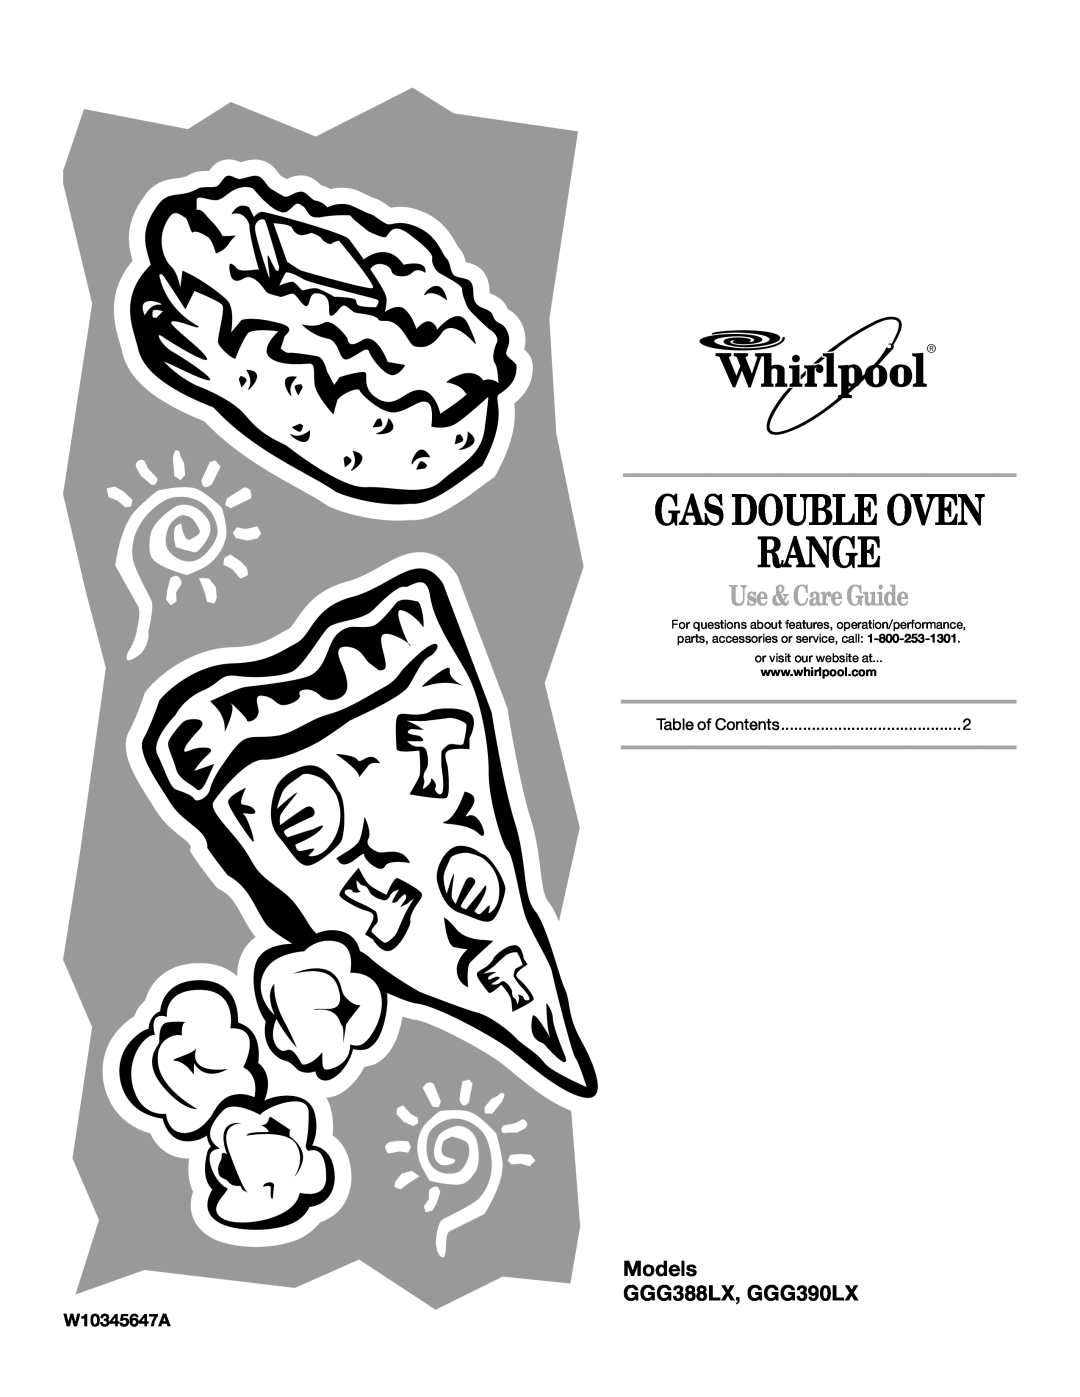 Whirlpool GGG388LX, GGG390LX manual Gas Double Oven Range, Use & Care Guide, Models, W10345647A, or visit our website at 